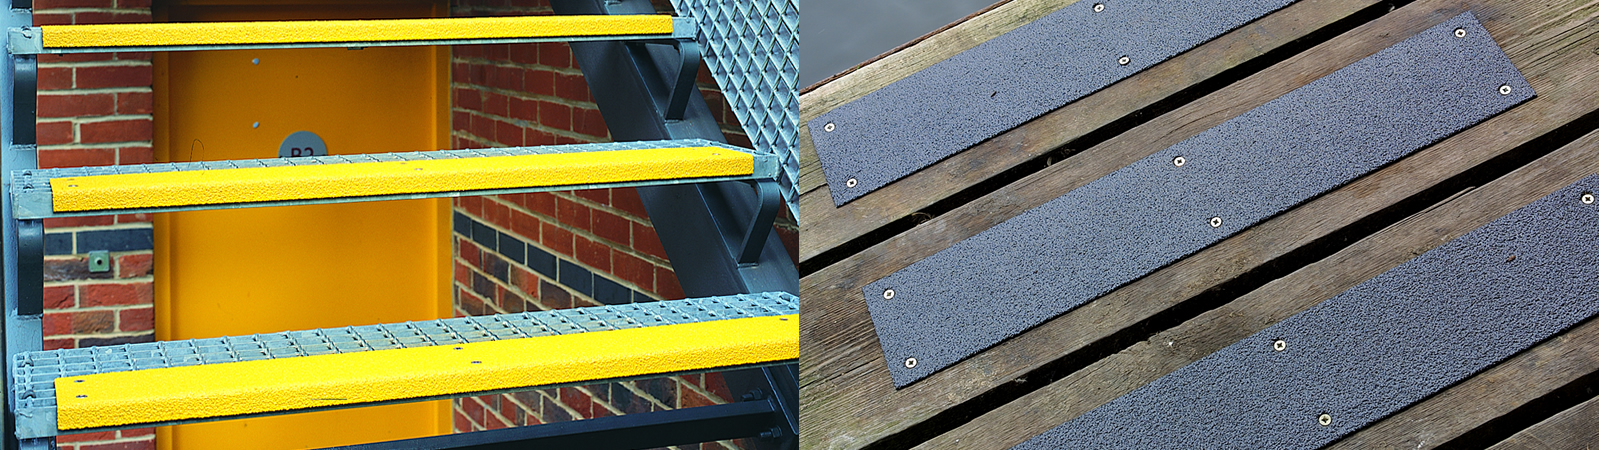 TreadSafe® Stainless Ladder Rung Covers